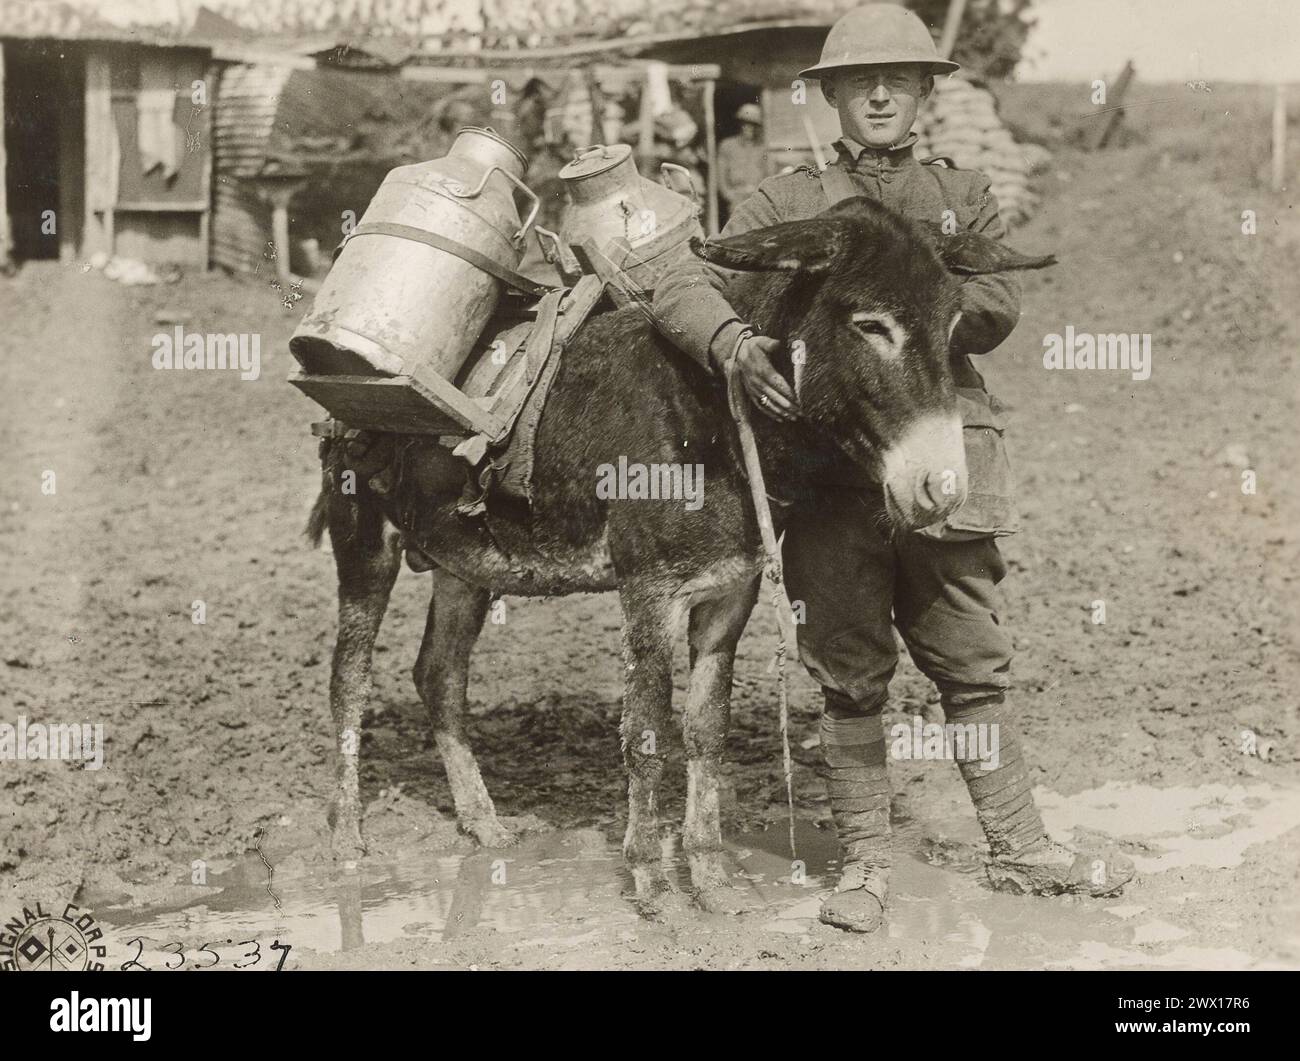 Original caption: Donkey and driver. The donkey is used to carry water and supplies to soldiers; Le Claire France ca. 1918 Stock Photo